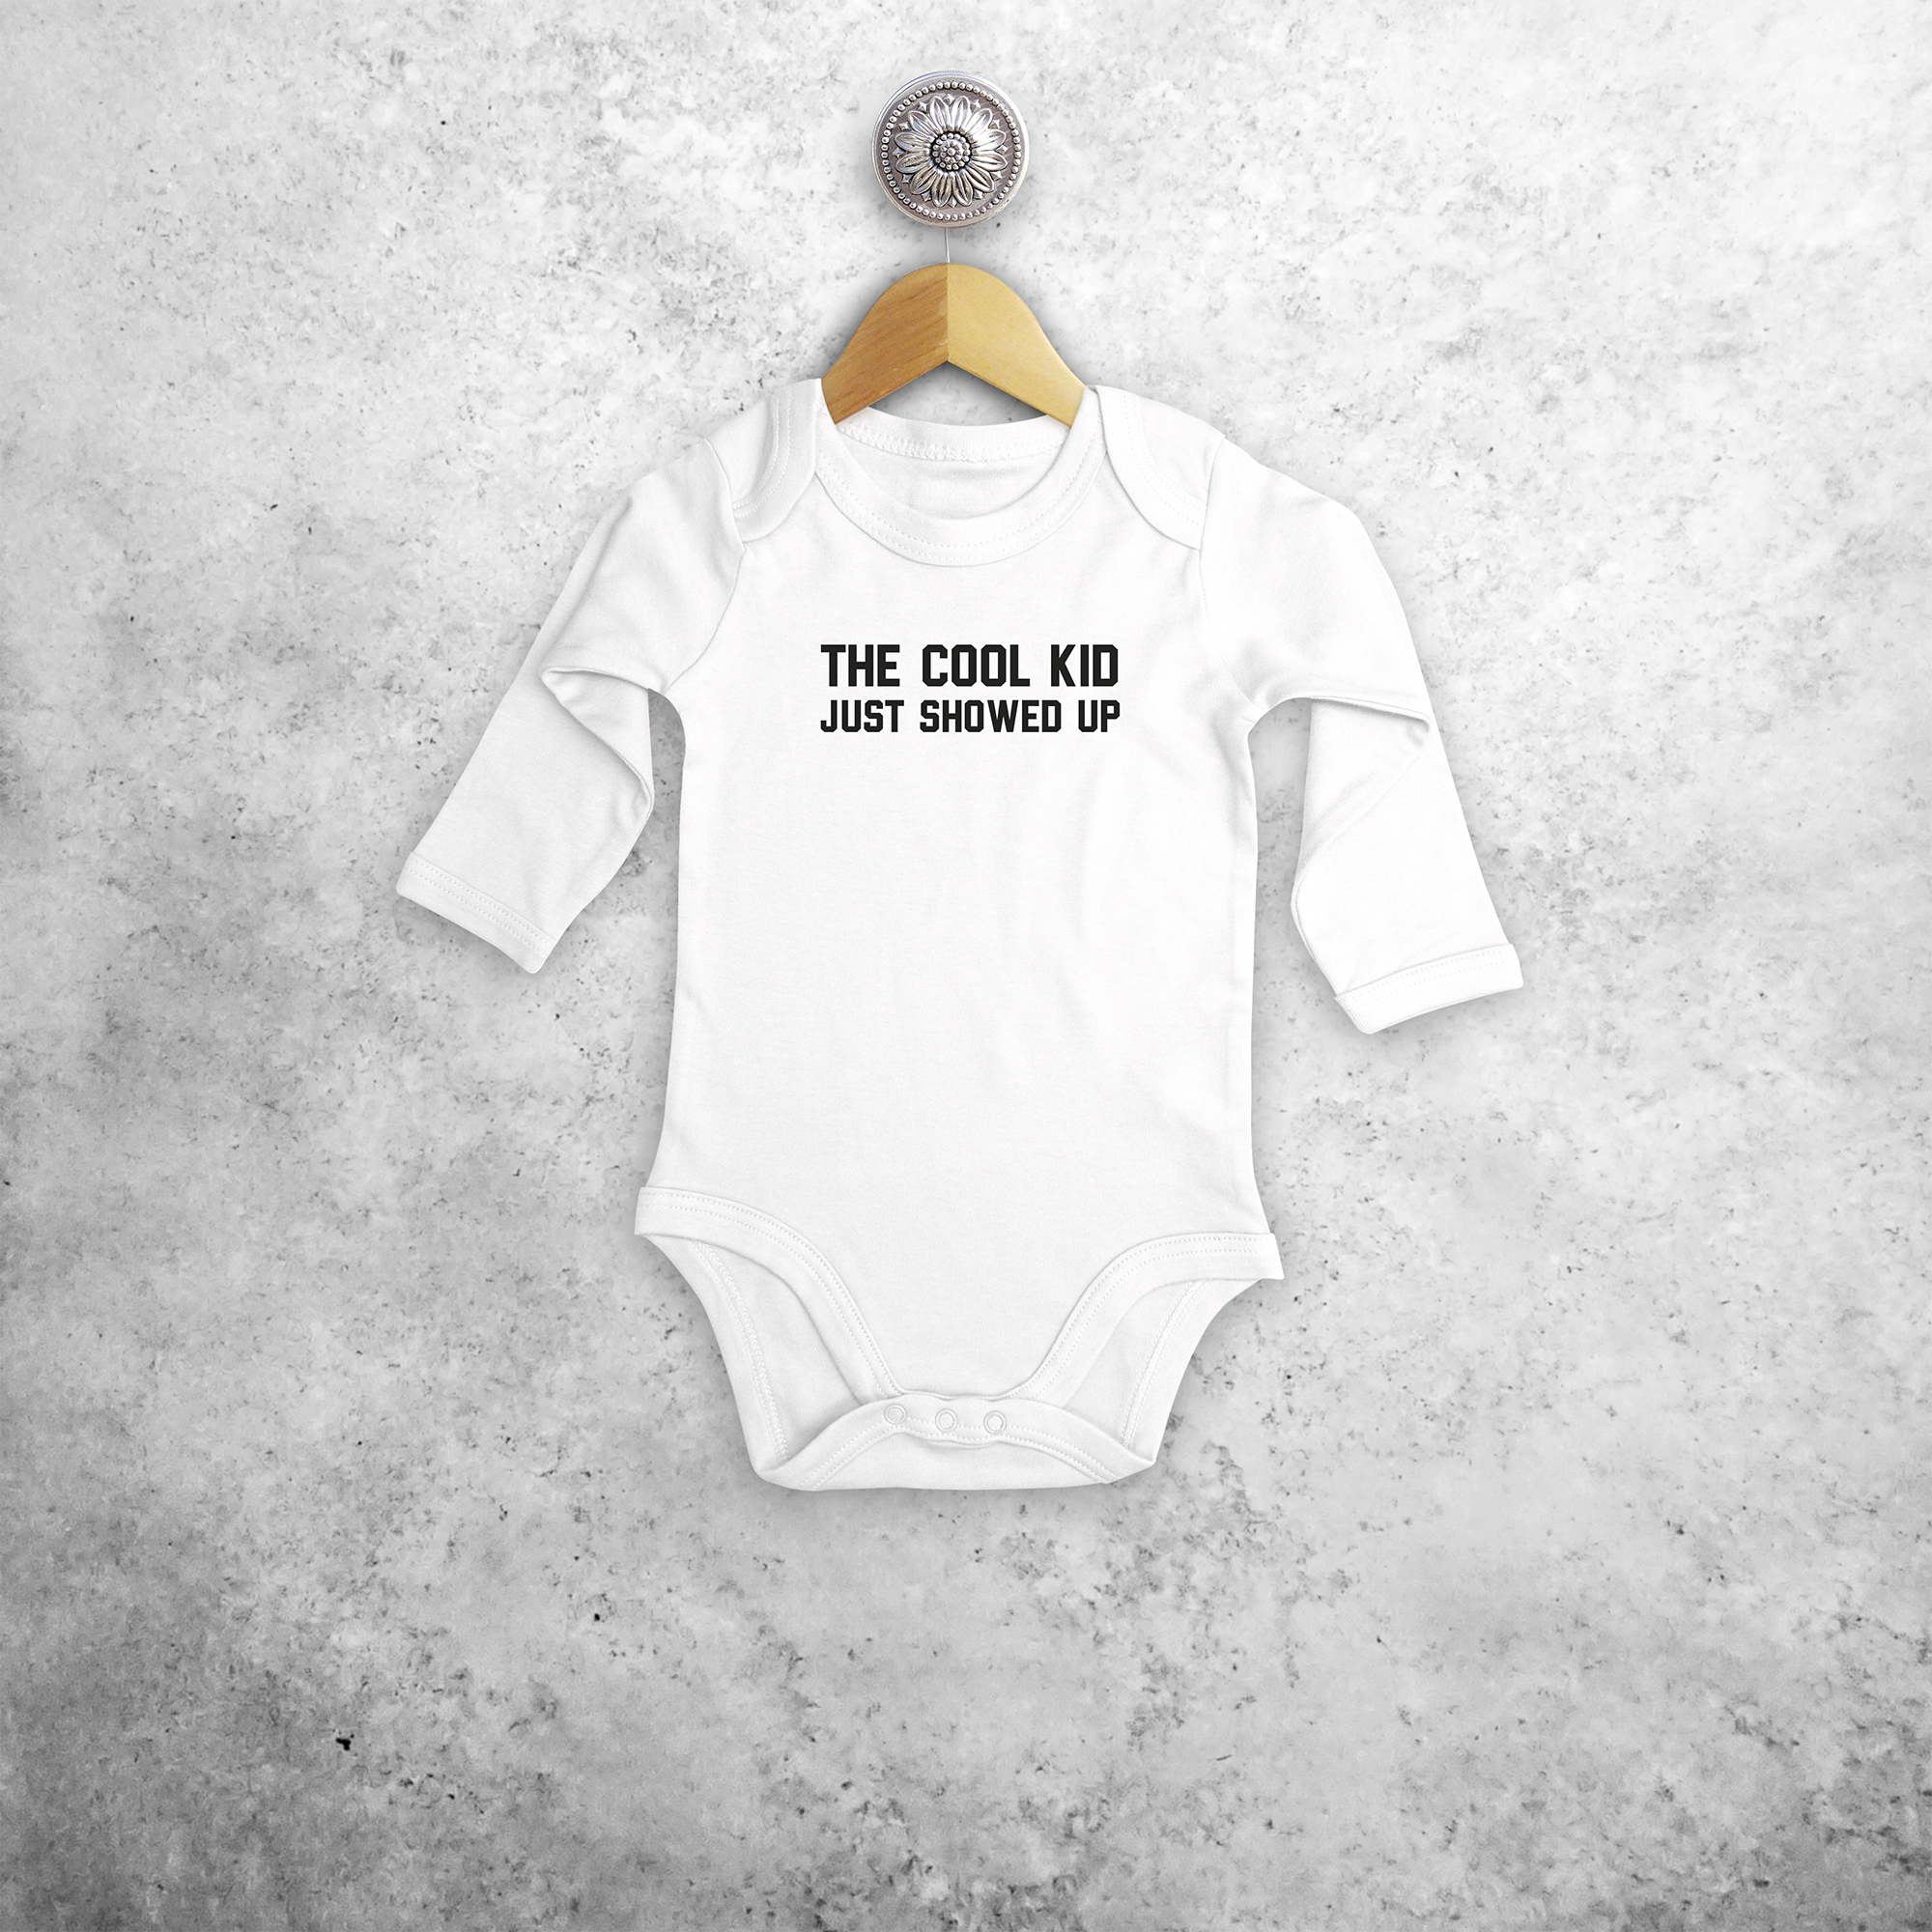 'The cool kid just showed up' baby longsleeve bodysuit